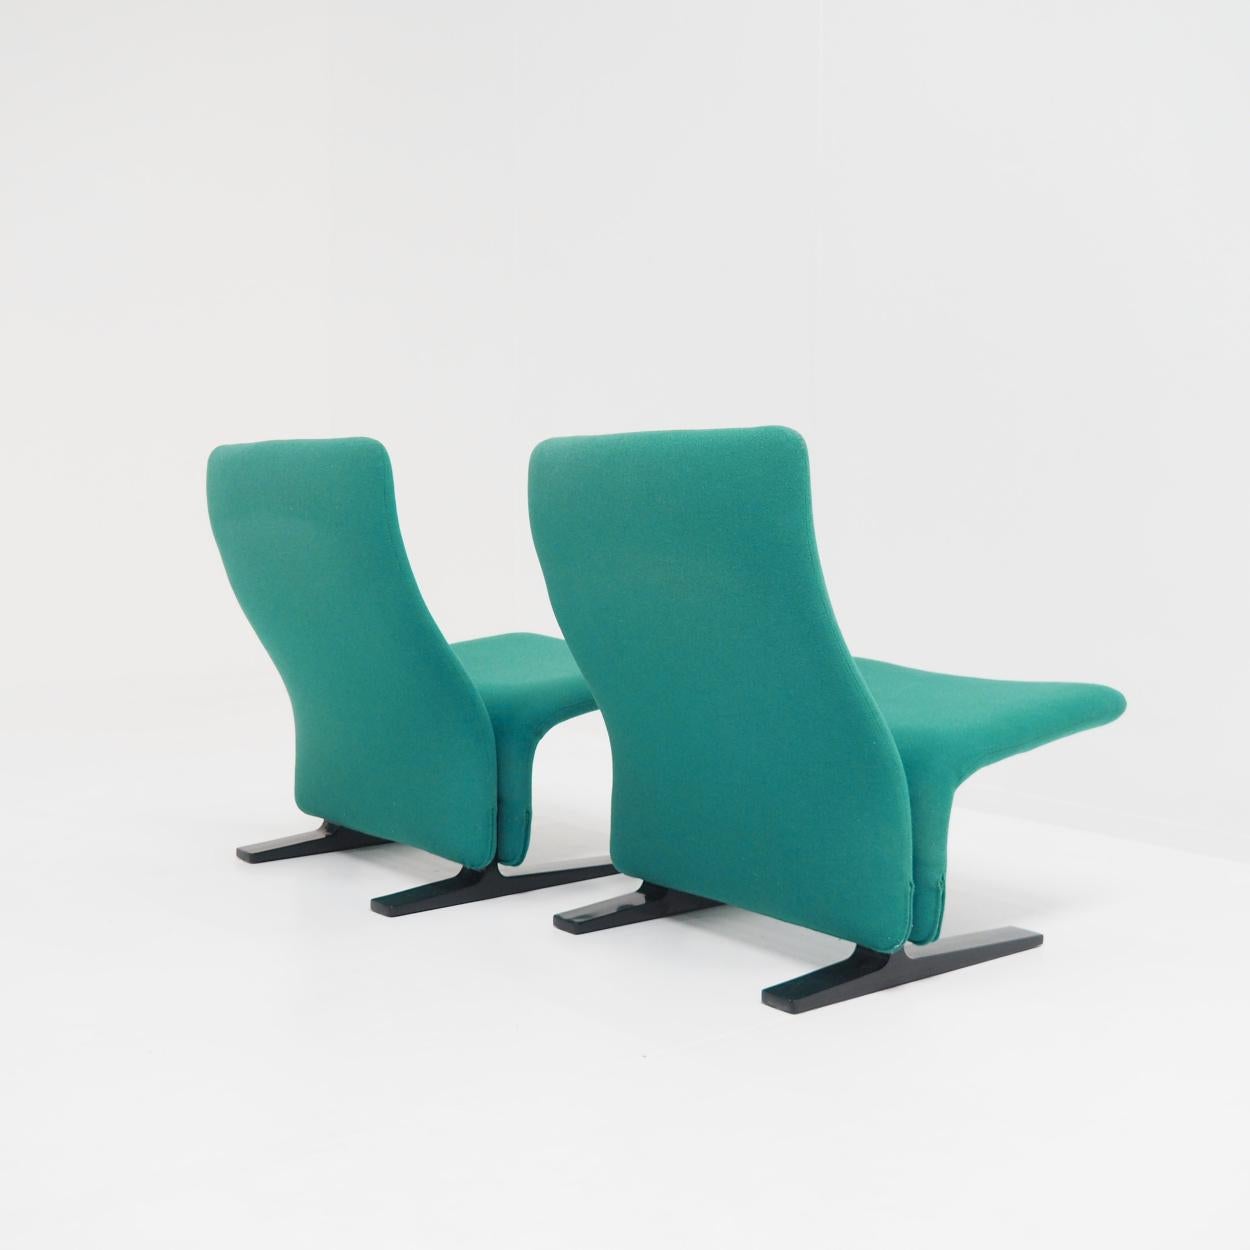 Dutch Set of F-780 “Concorde” Chairs by Pierre Paulin for Artifort